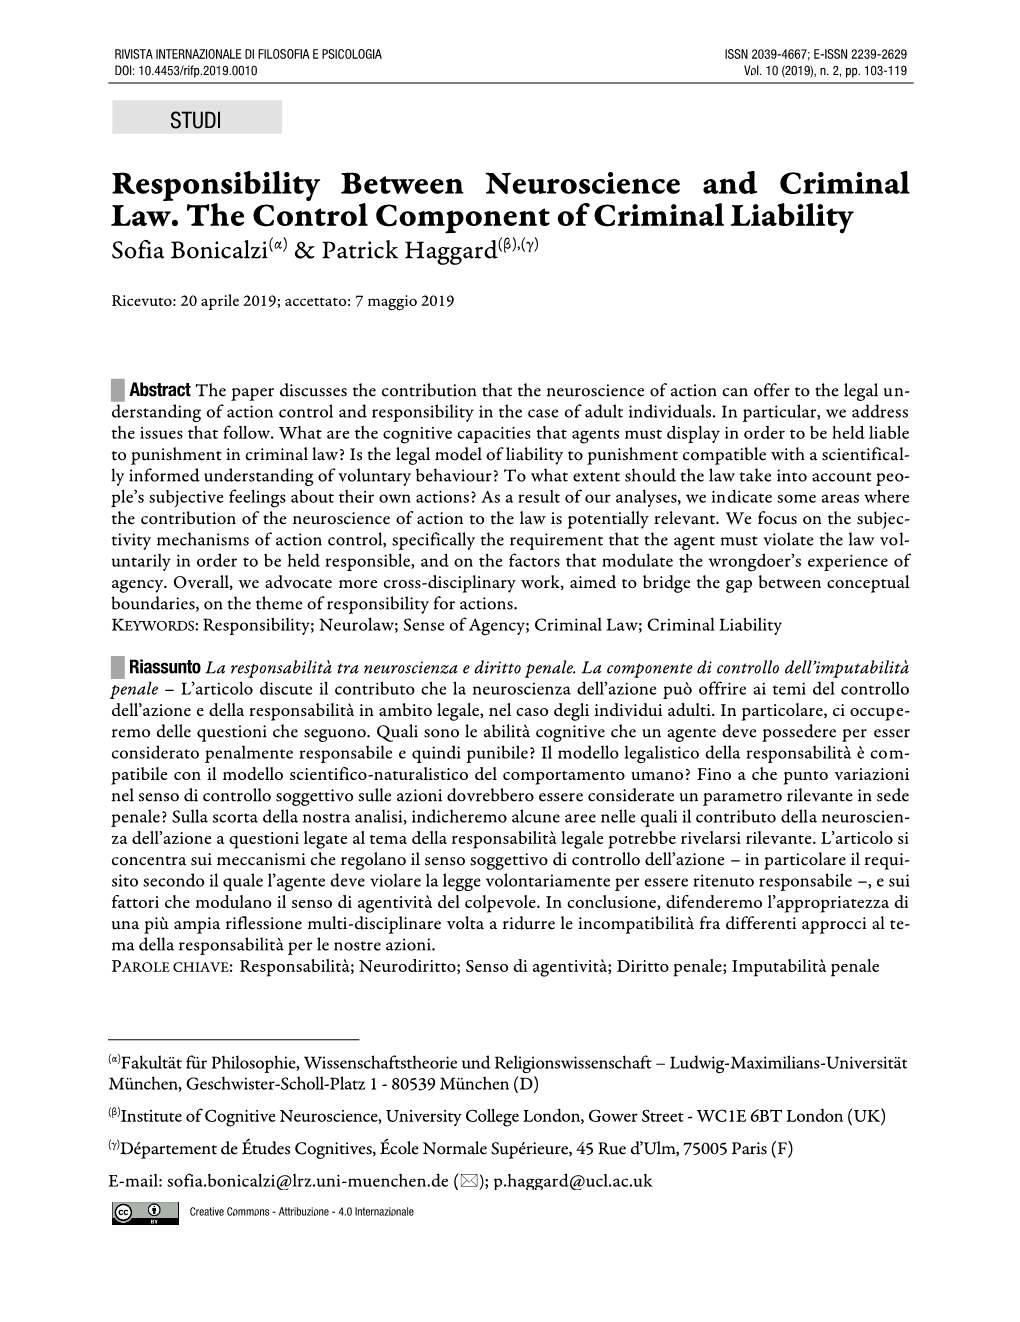 Responsibility Between Neuroscience and Criminal Law. the Control Component of Criminal Liability Sofia Bonicalzi(Α) & Patrick Haggard(Β),(Γ)